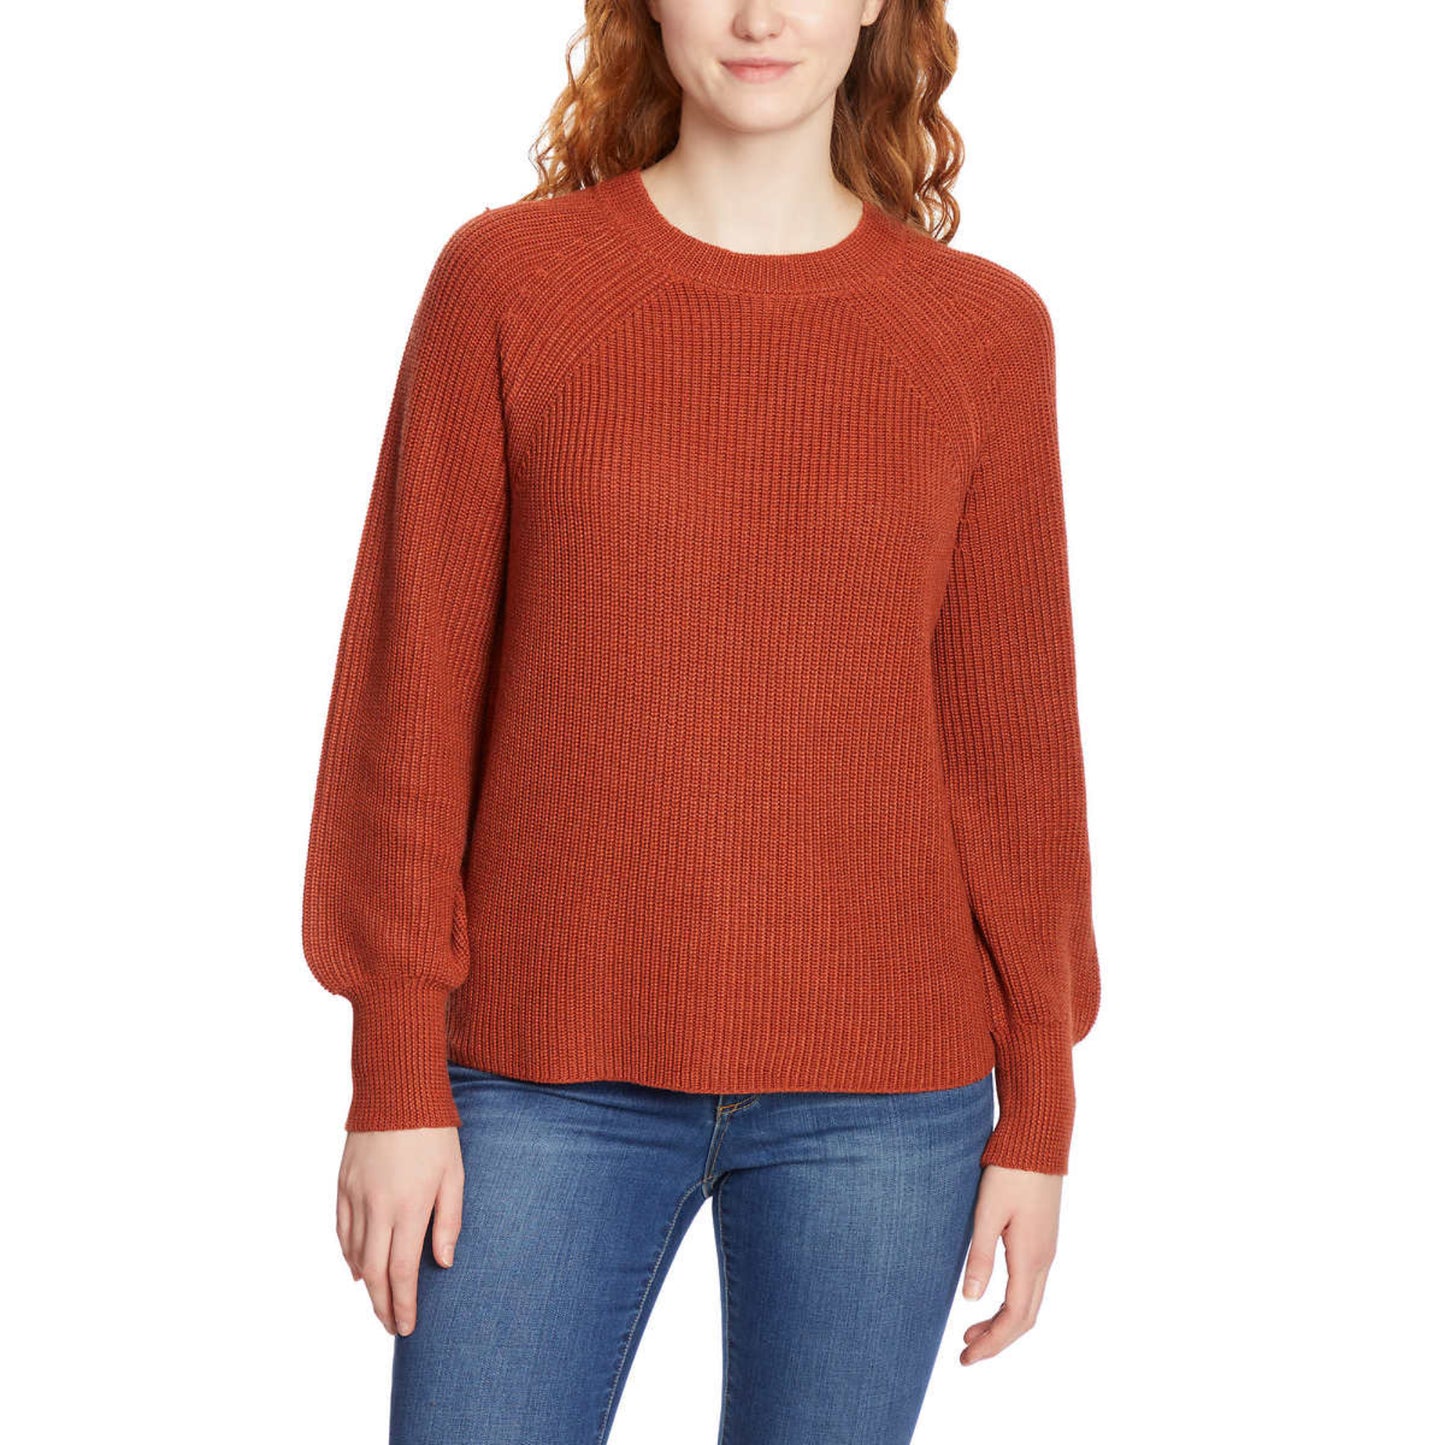 Jessica Simpson Women's Bell Sleeve Soft Rib Knit Top Relaxed Fit Sweater